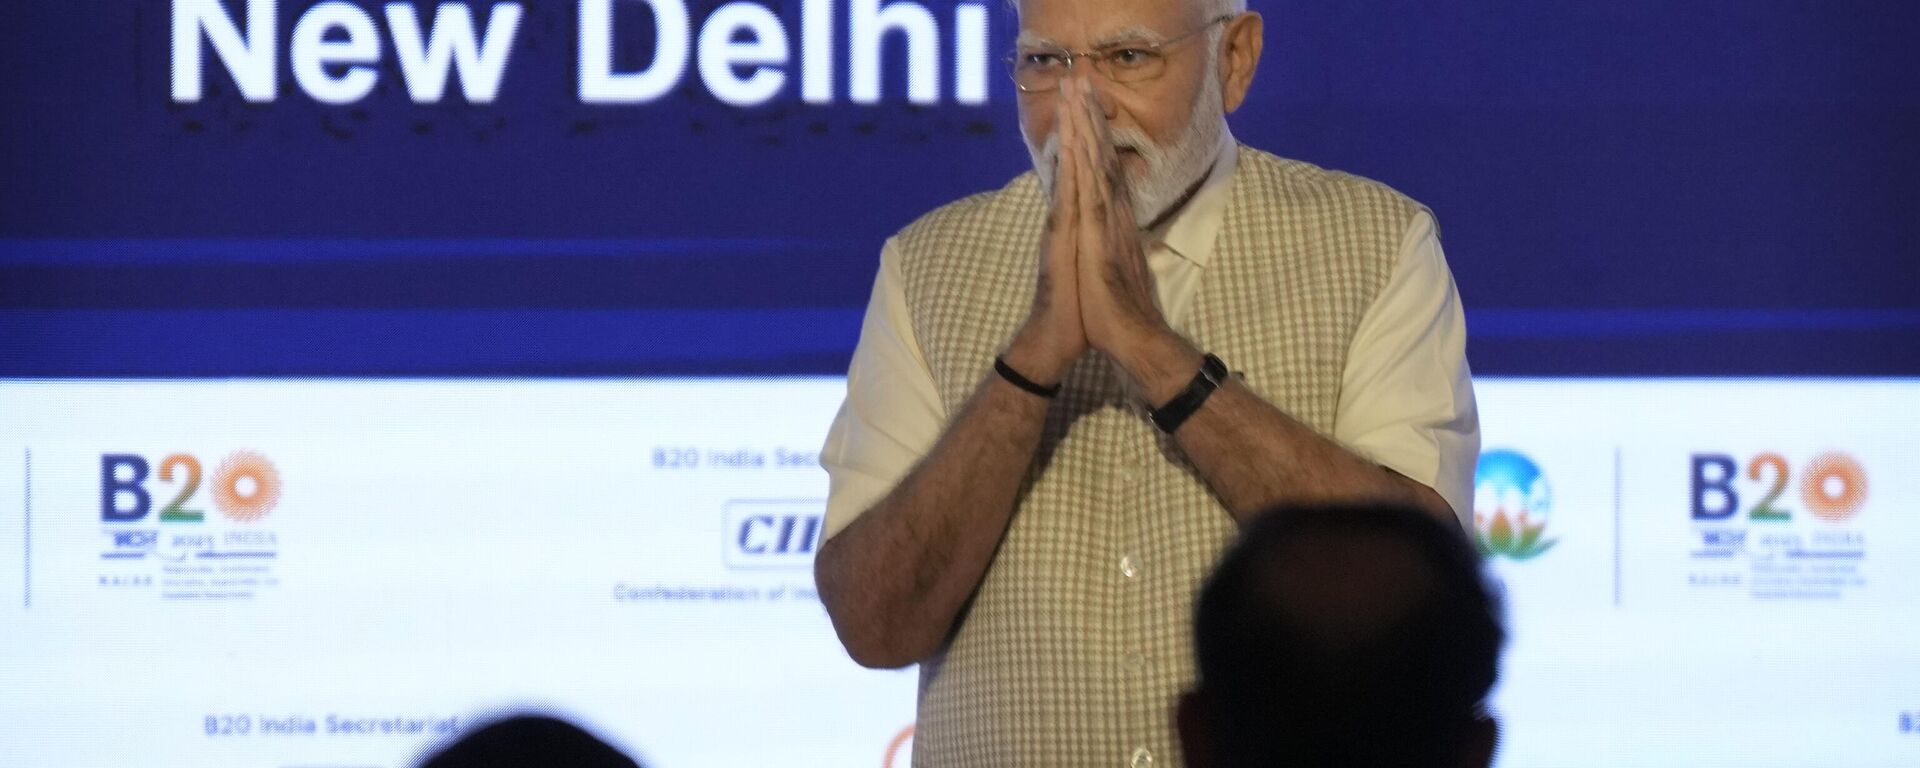 Indian Prime Minister Narendra Modi greets delegates after speaking at a special session of the Business 20 or B20 Summit ahead of the G20 Summit - Sputnik Africa, 1920, 03.09.2023